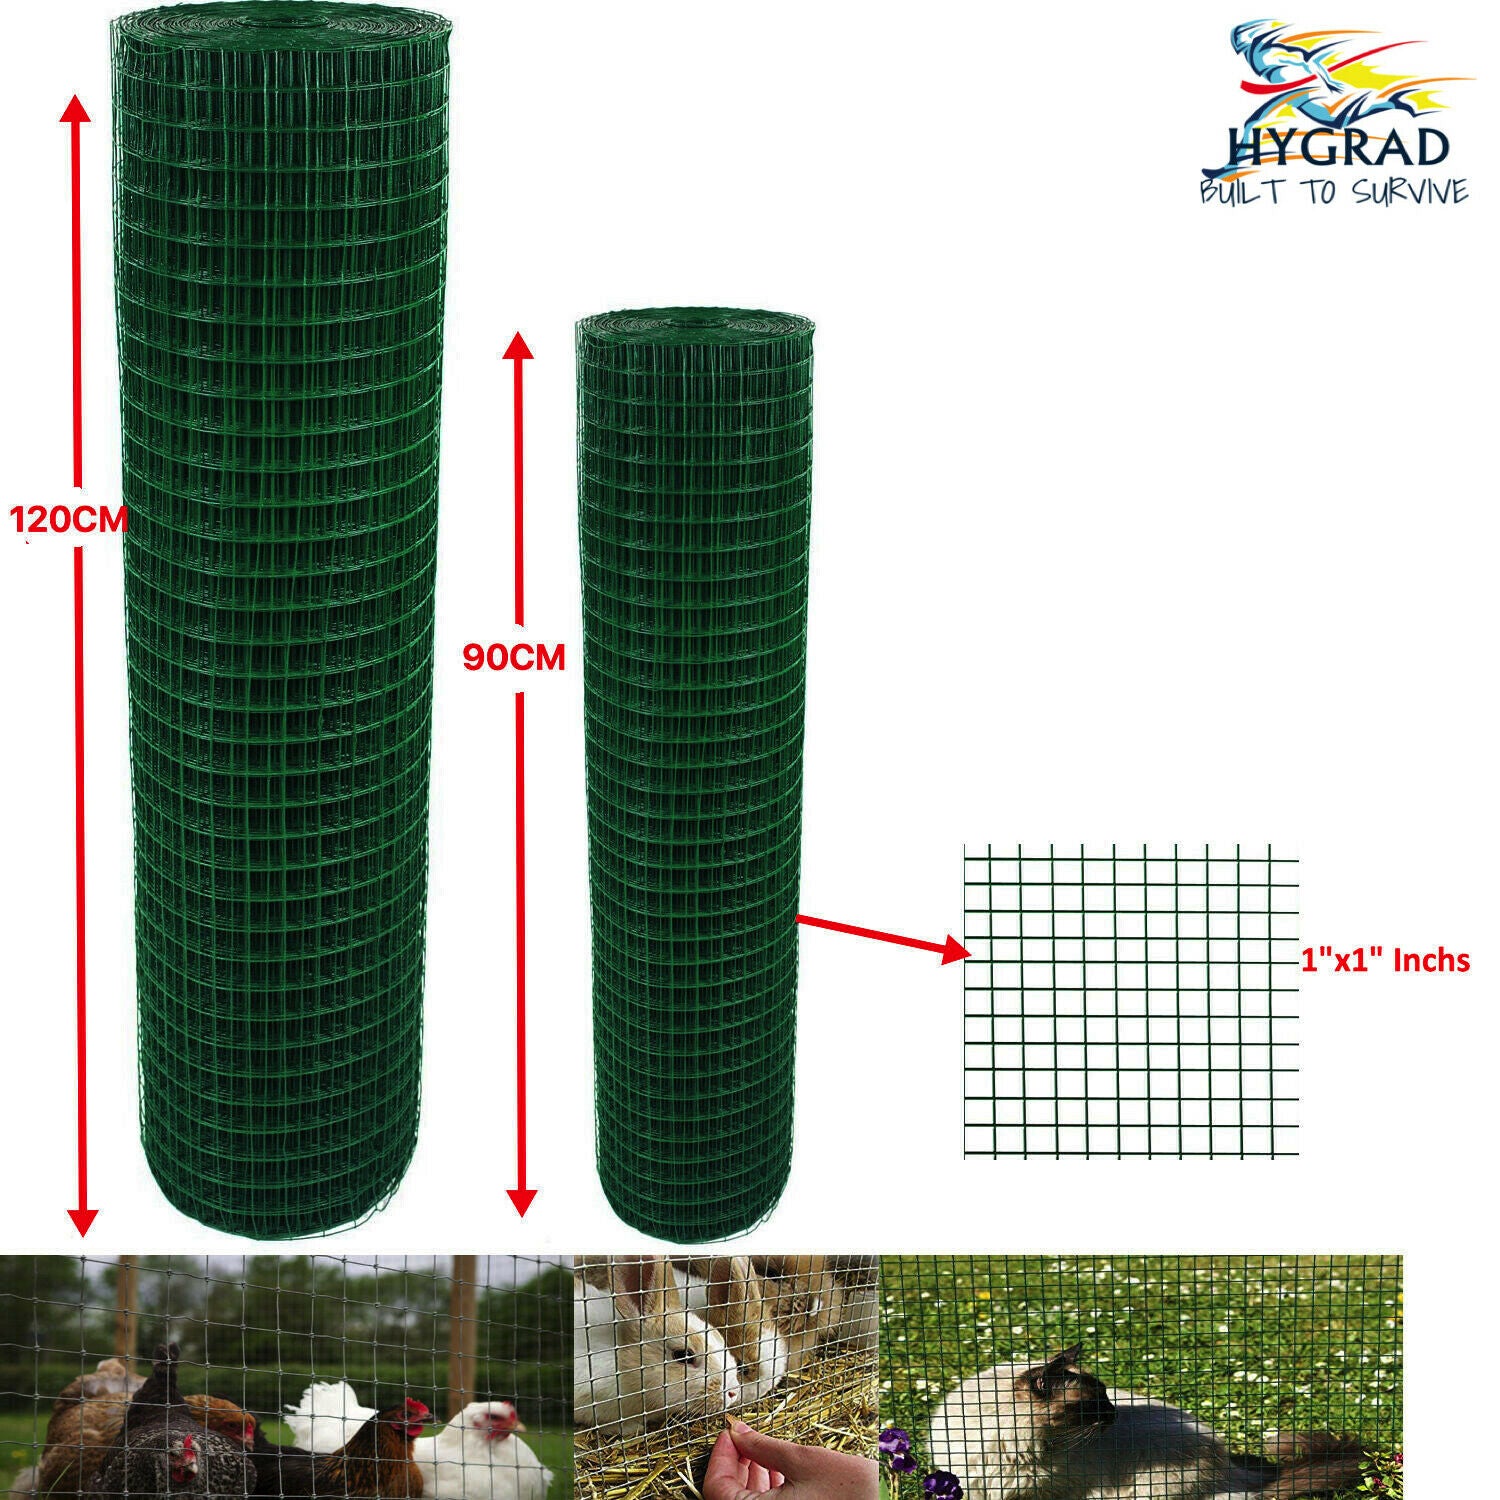 PVC Coated Mesh Wire Green Fencing 90/120cm Garden Galvanised Fence Net 30/45 M